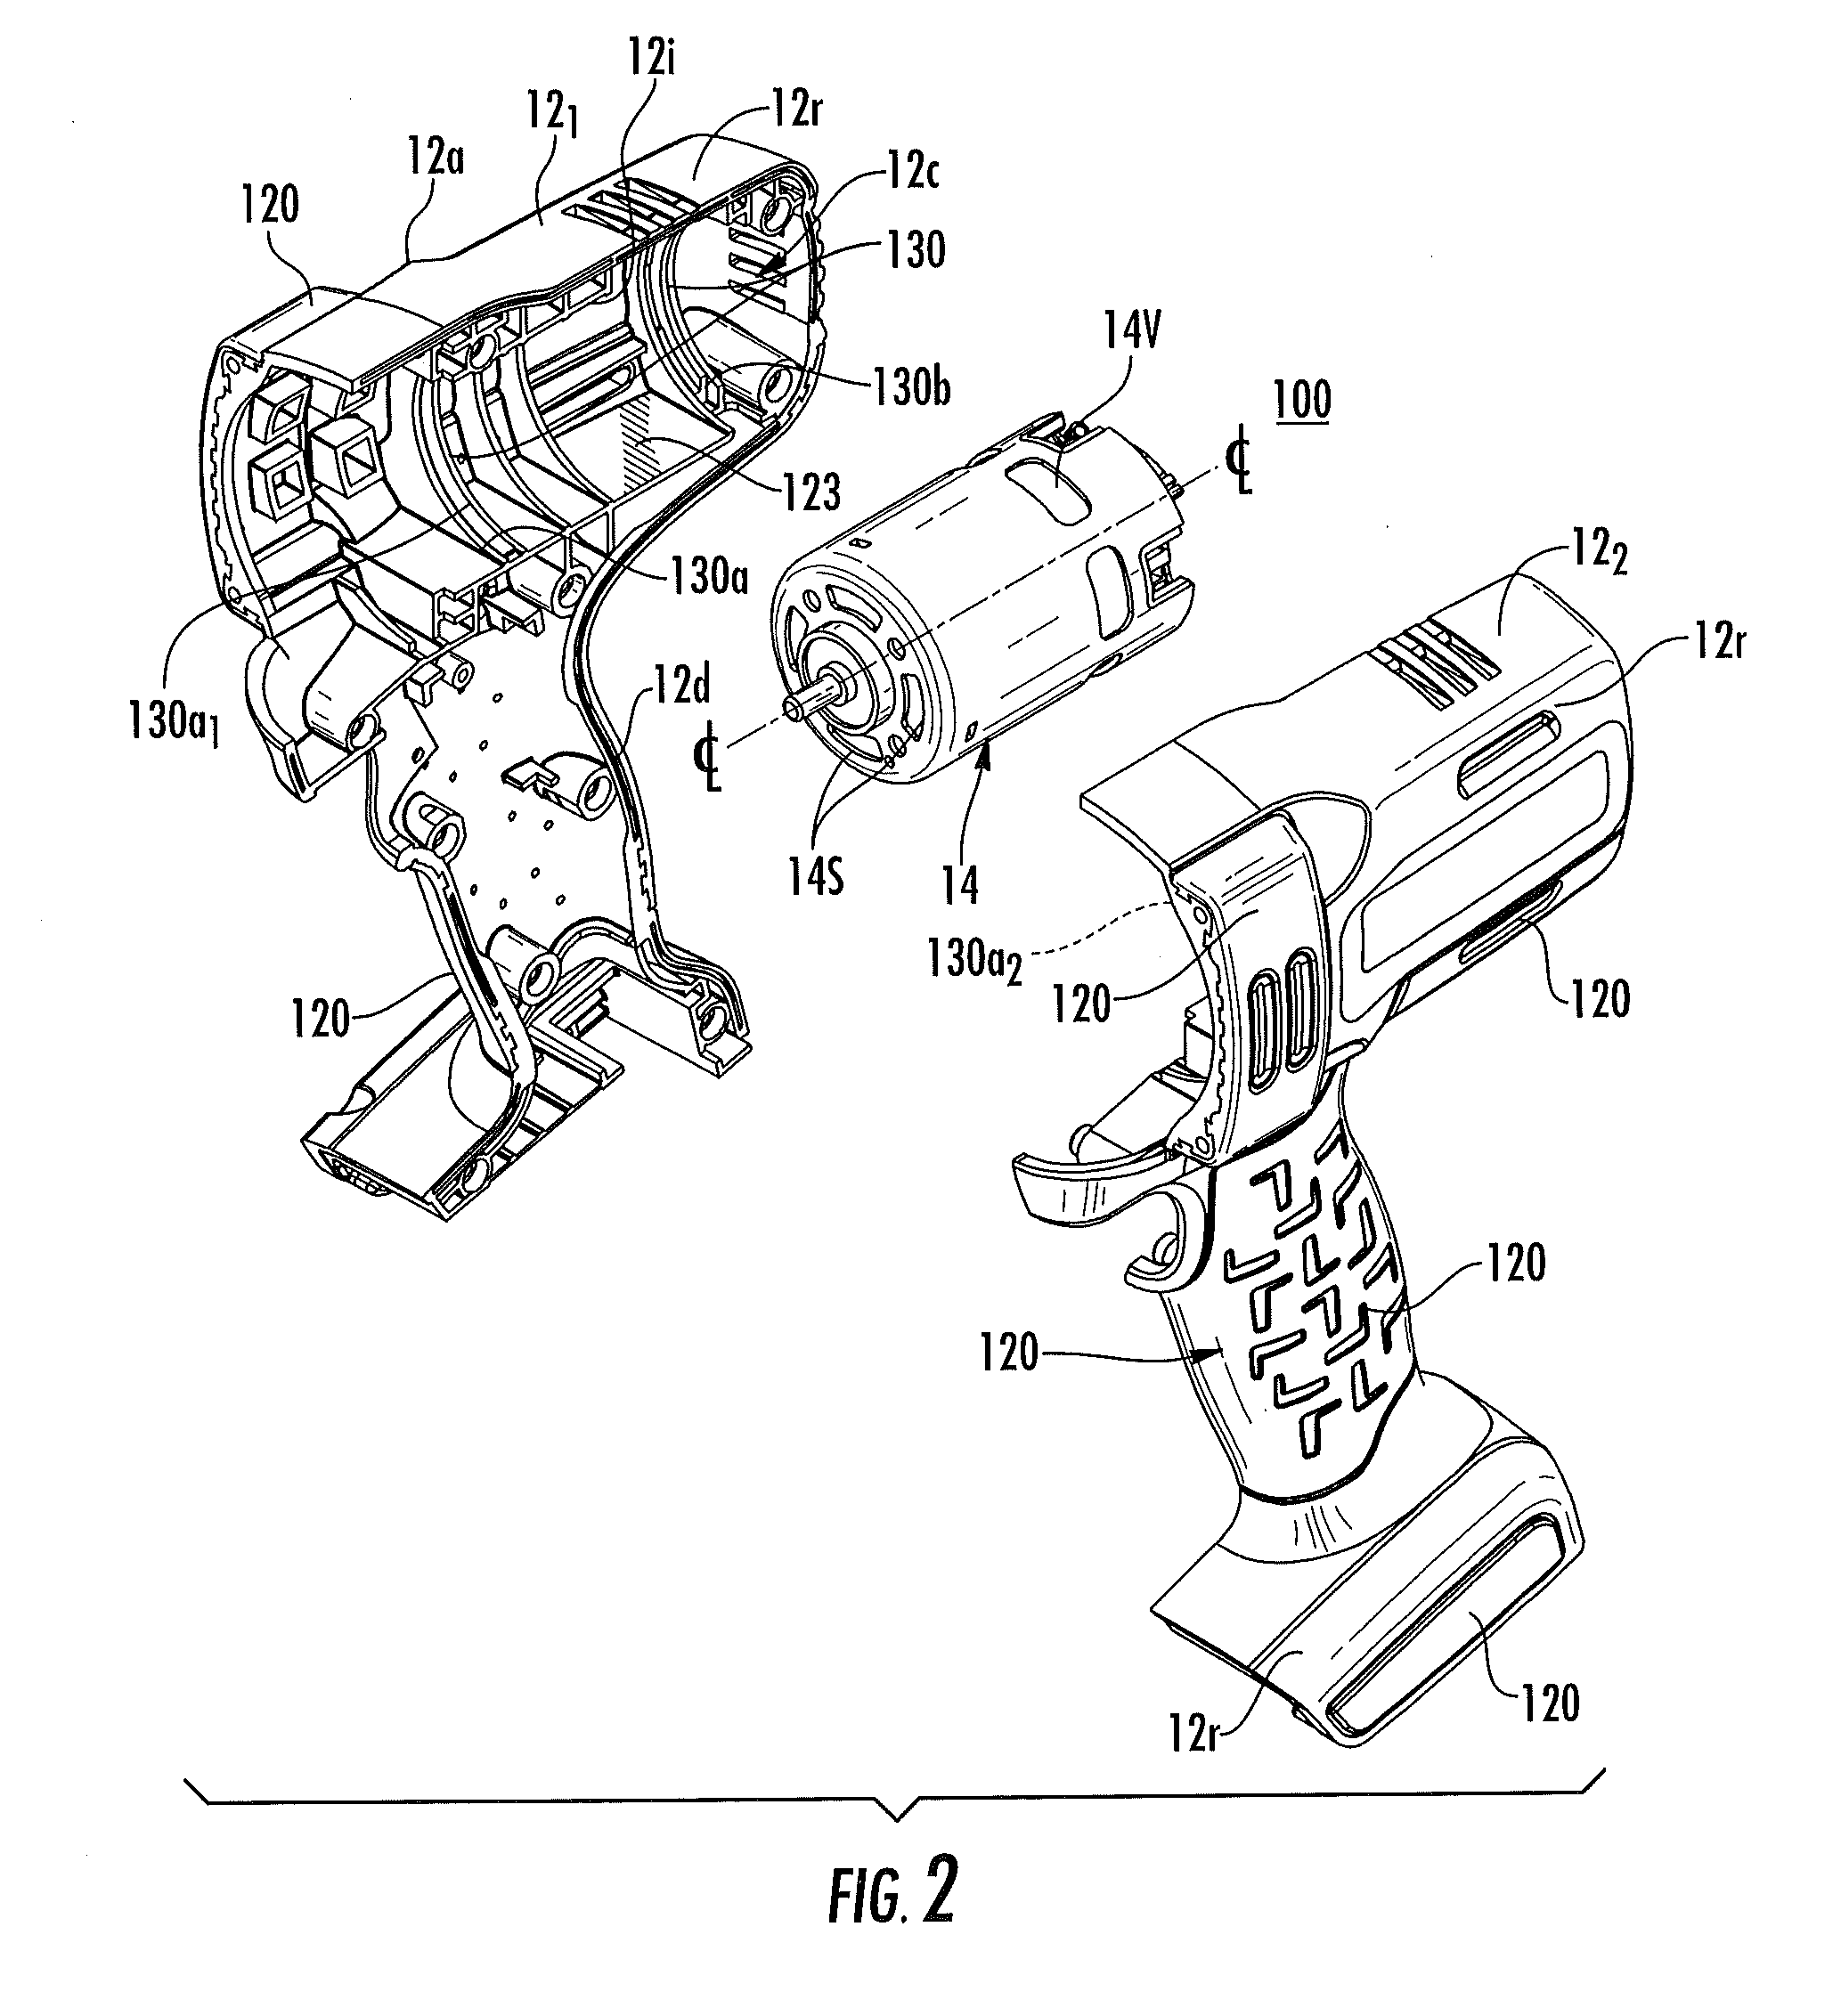 Power tools with housings having integral resilient motor mounts